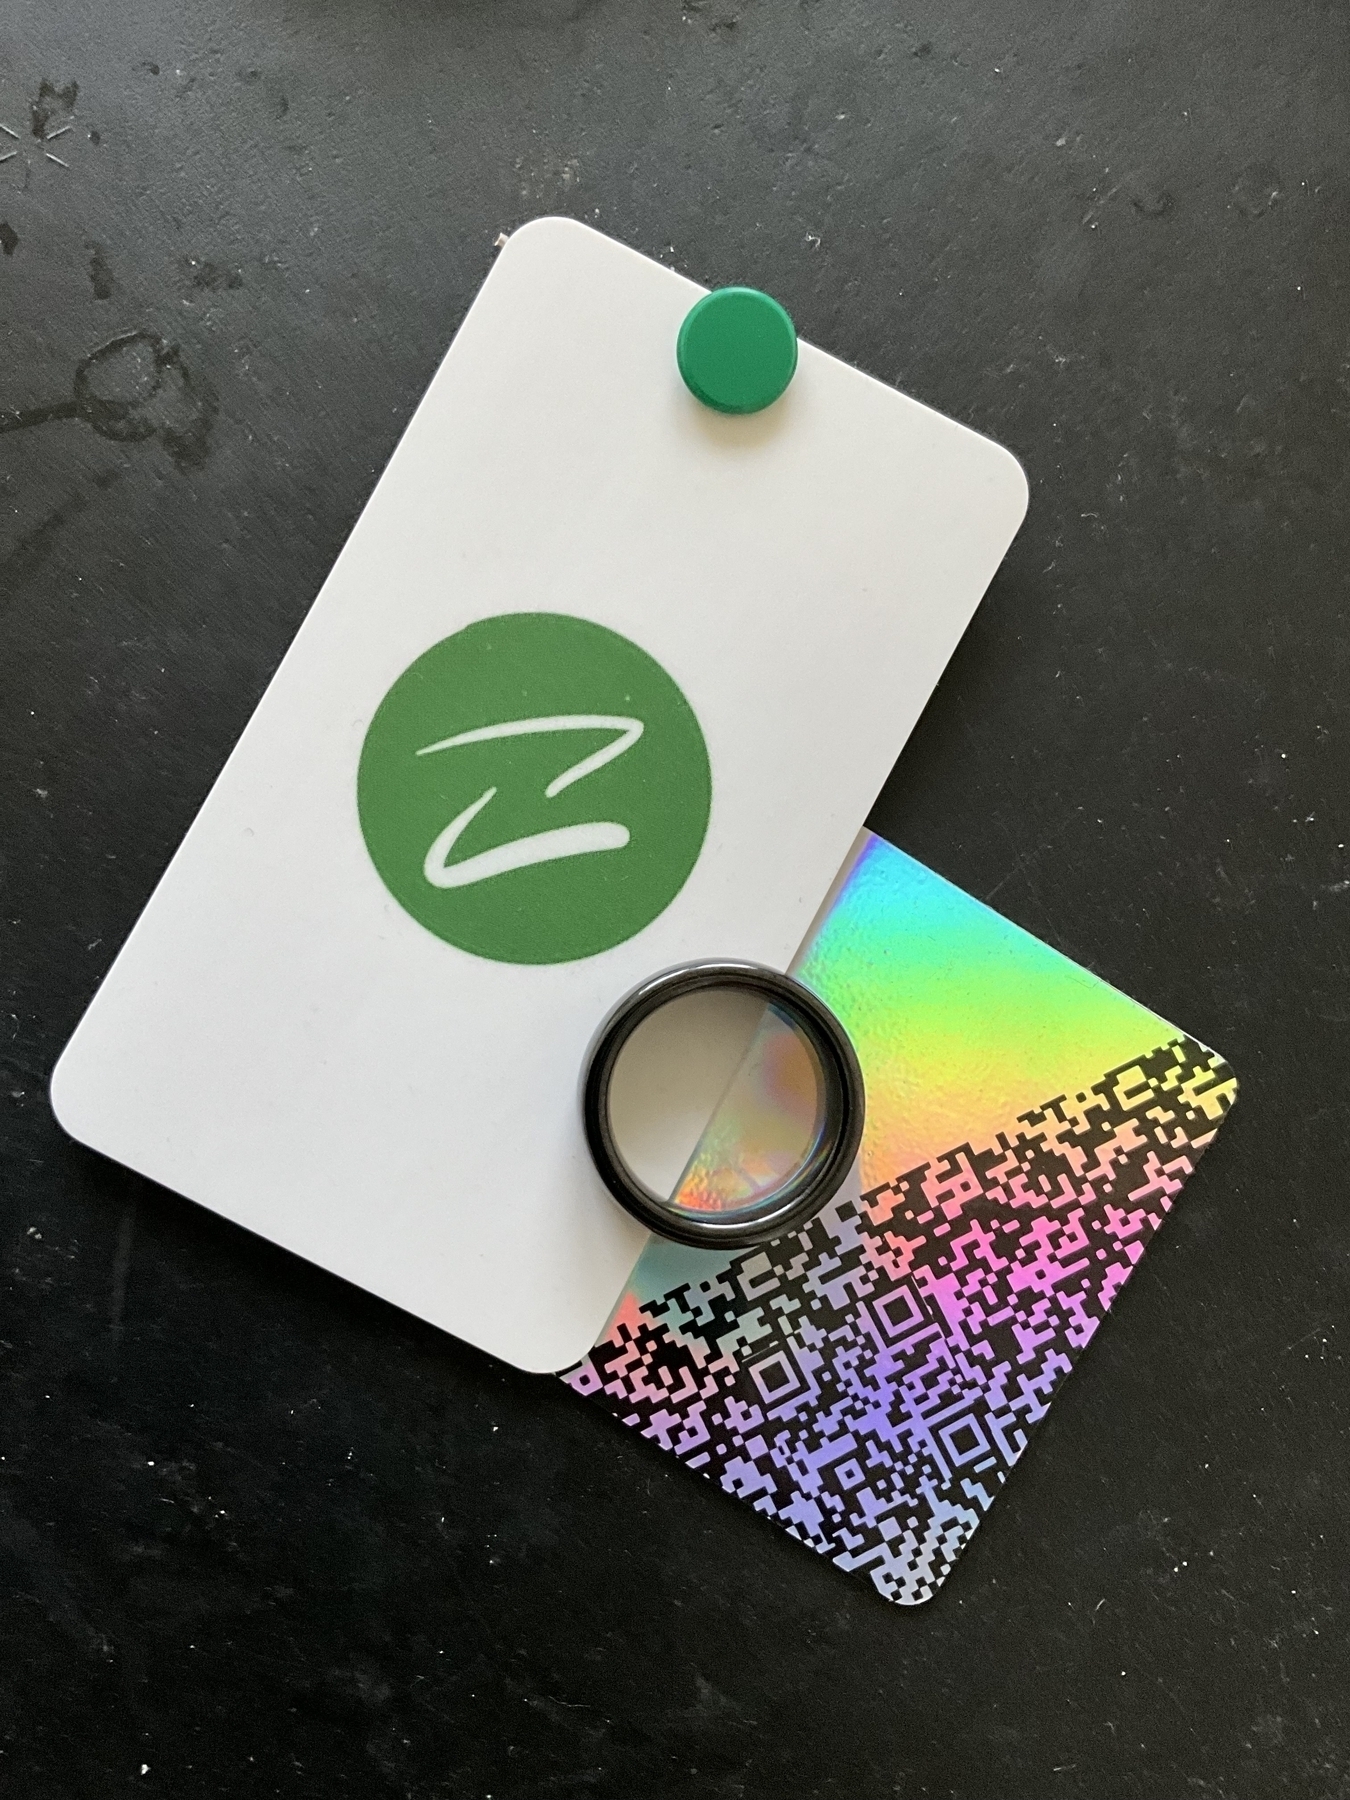 Black ring sitting on top of a white business card that shows Avanceé logo which sits on top of a business card that has a QR code and other symbols, looking like a QR code that are sitting on a holographic/rainbow colored business card. All items are sitting on top of a black background